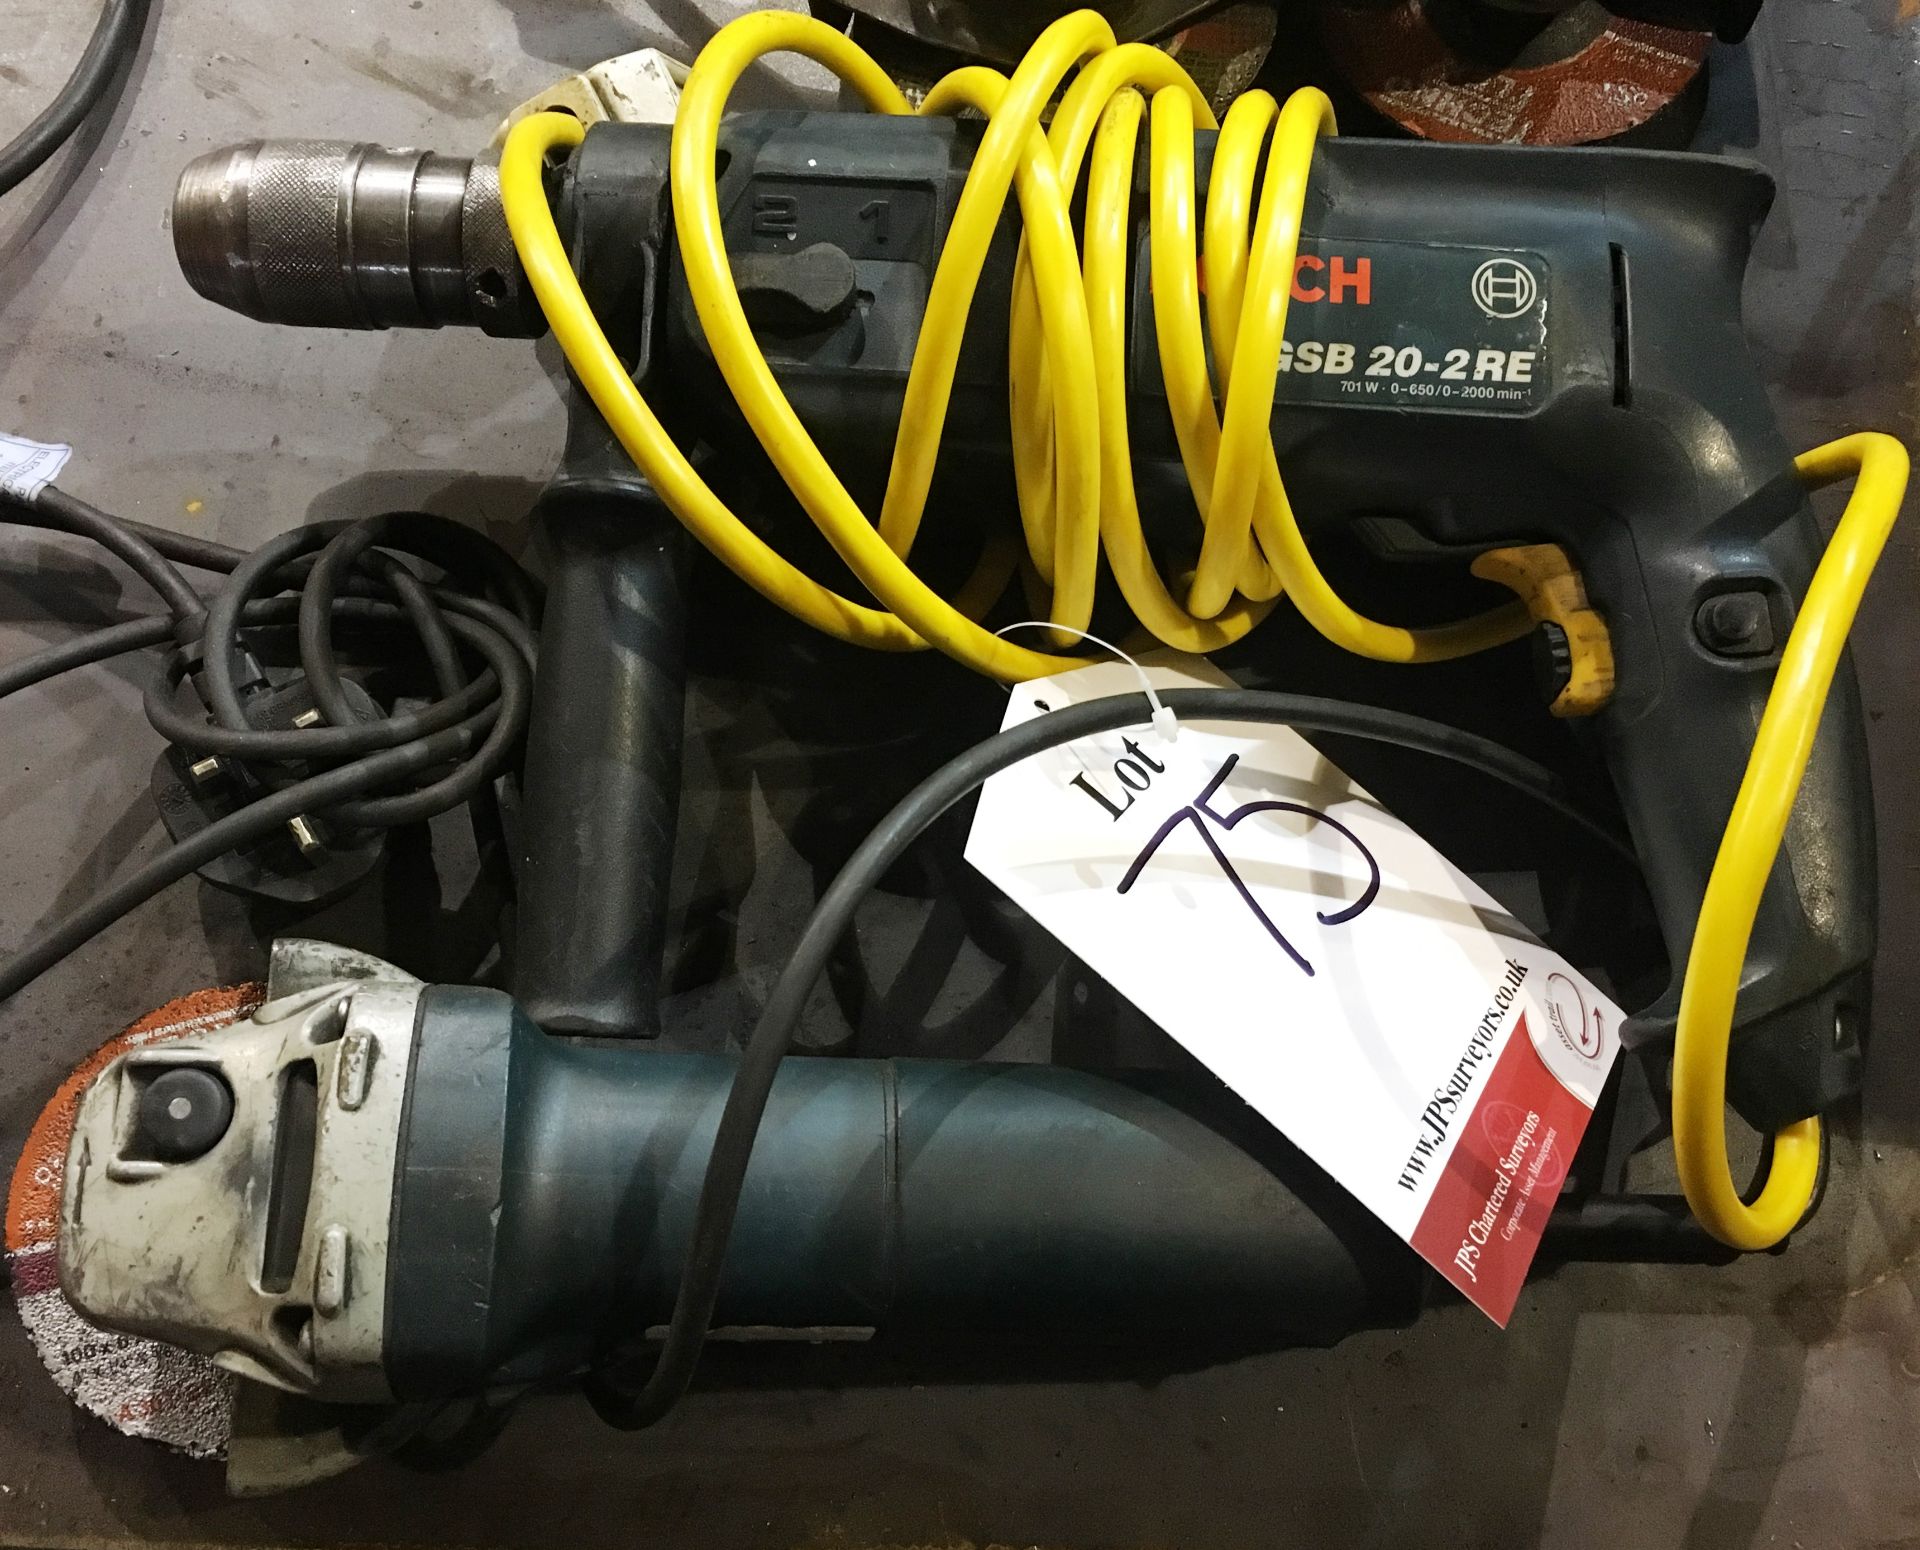 Bosch Impact Drill and Bosch Angle Grinder